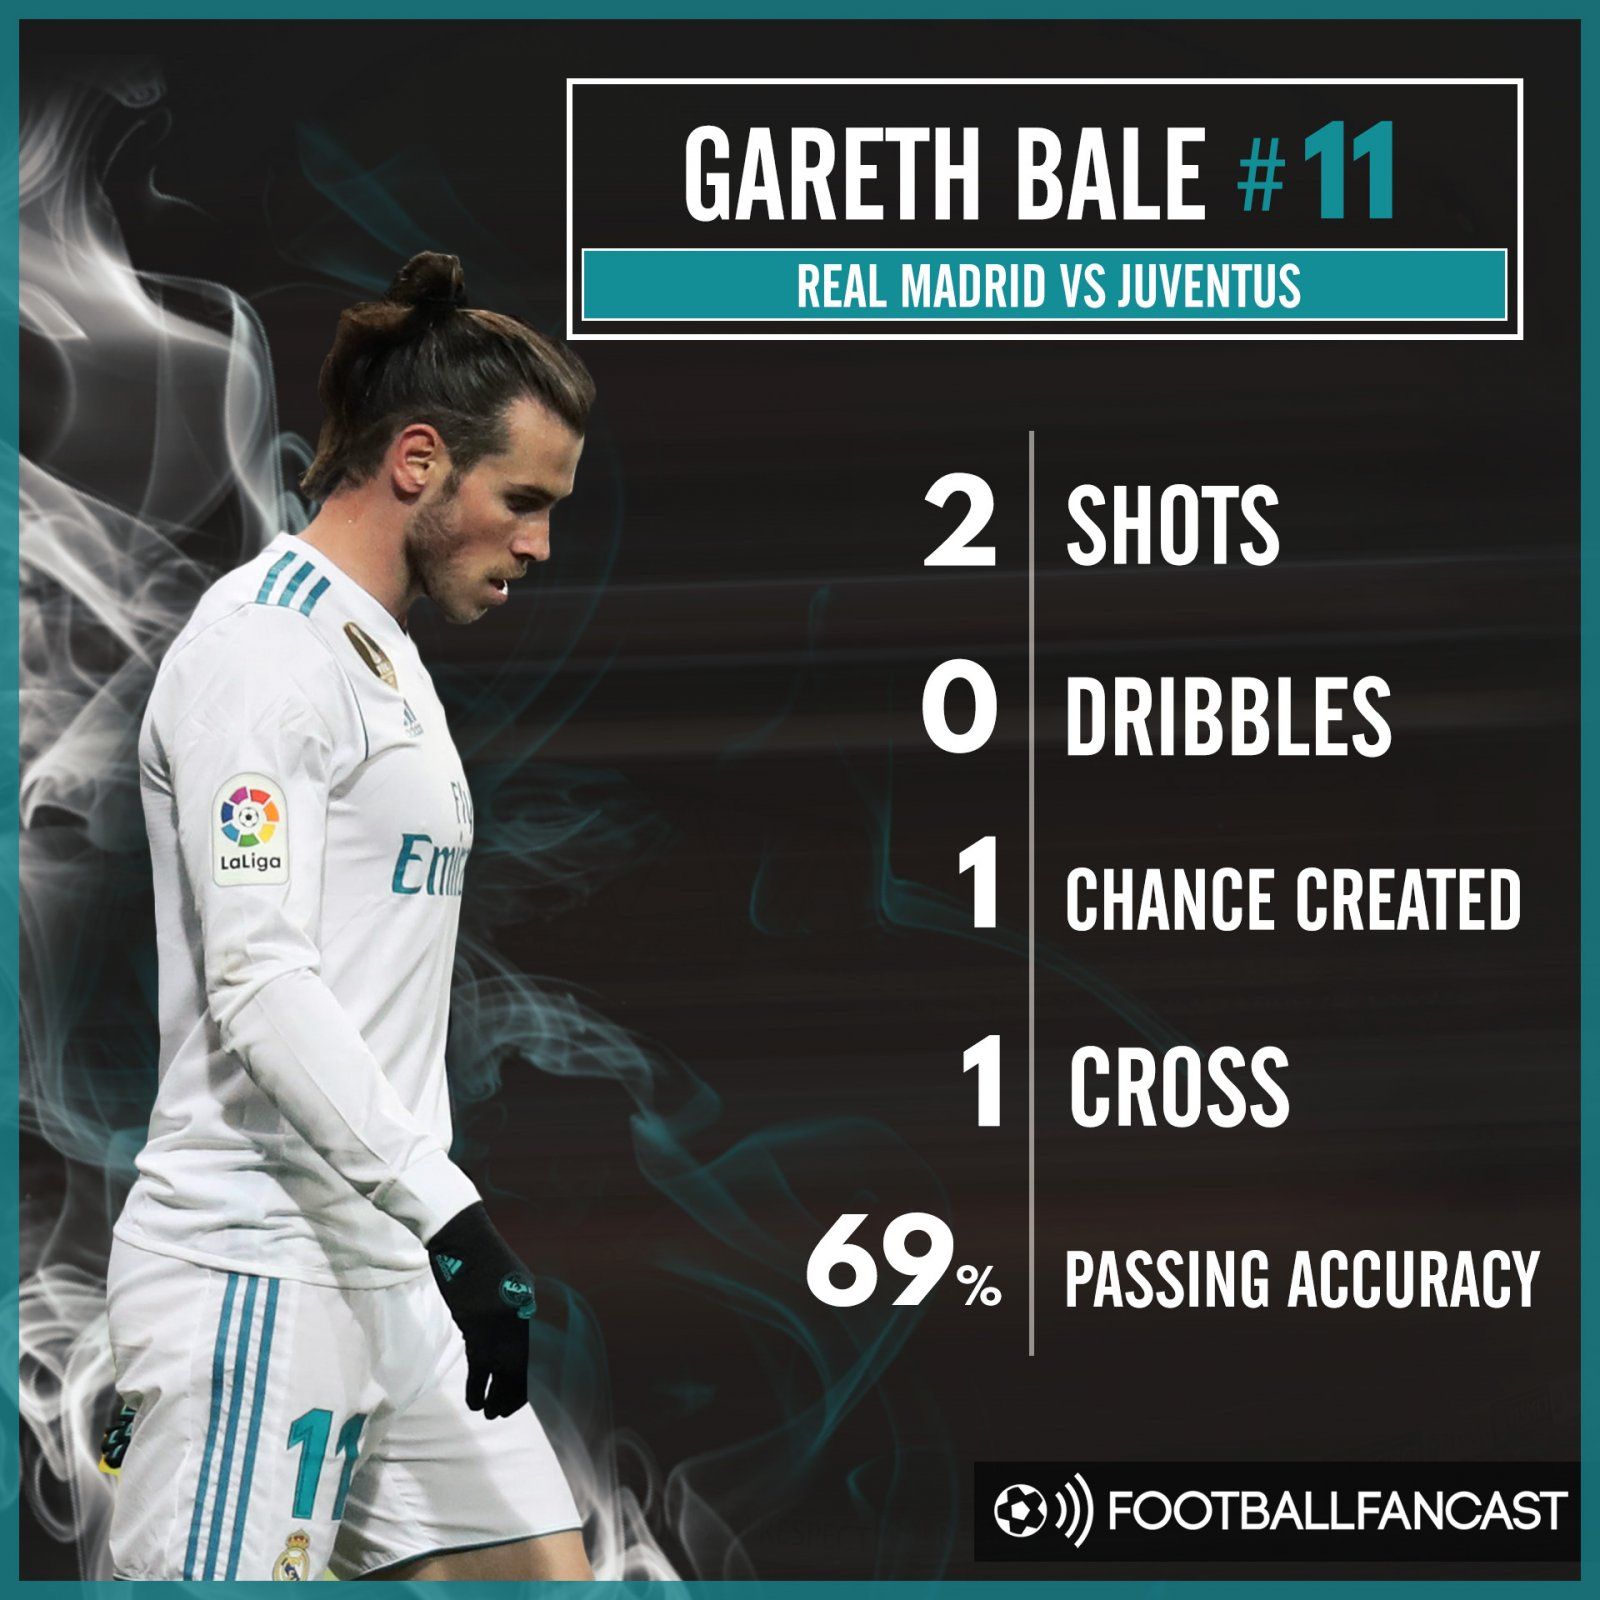 Gareth Bale's stats from Real Madrid's 3-1 defeat to Juventus